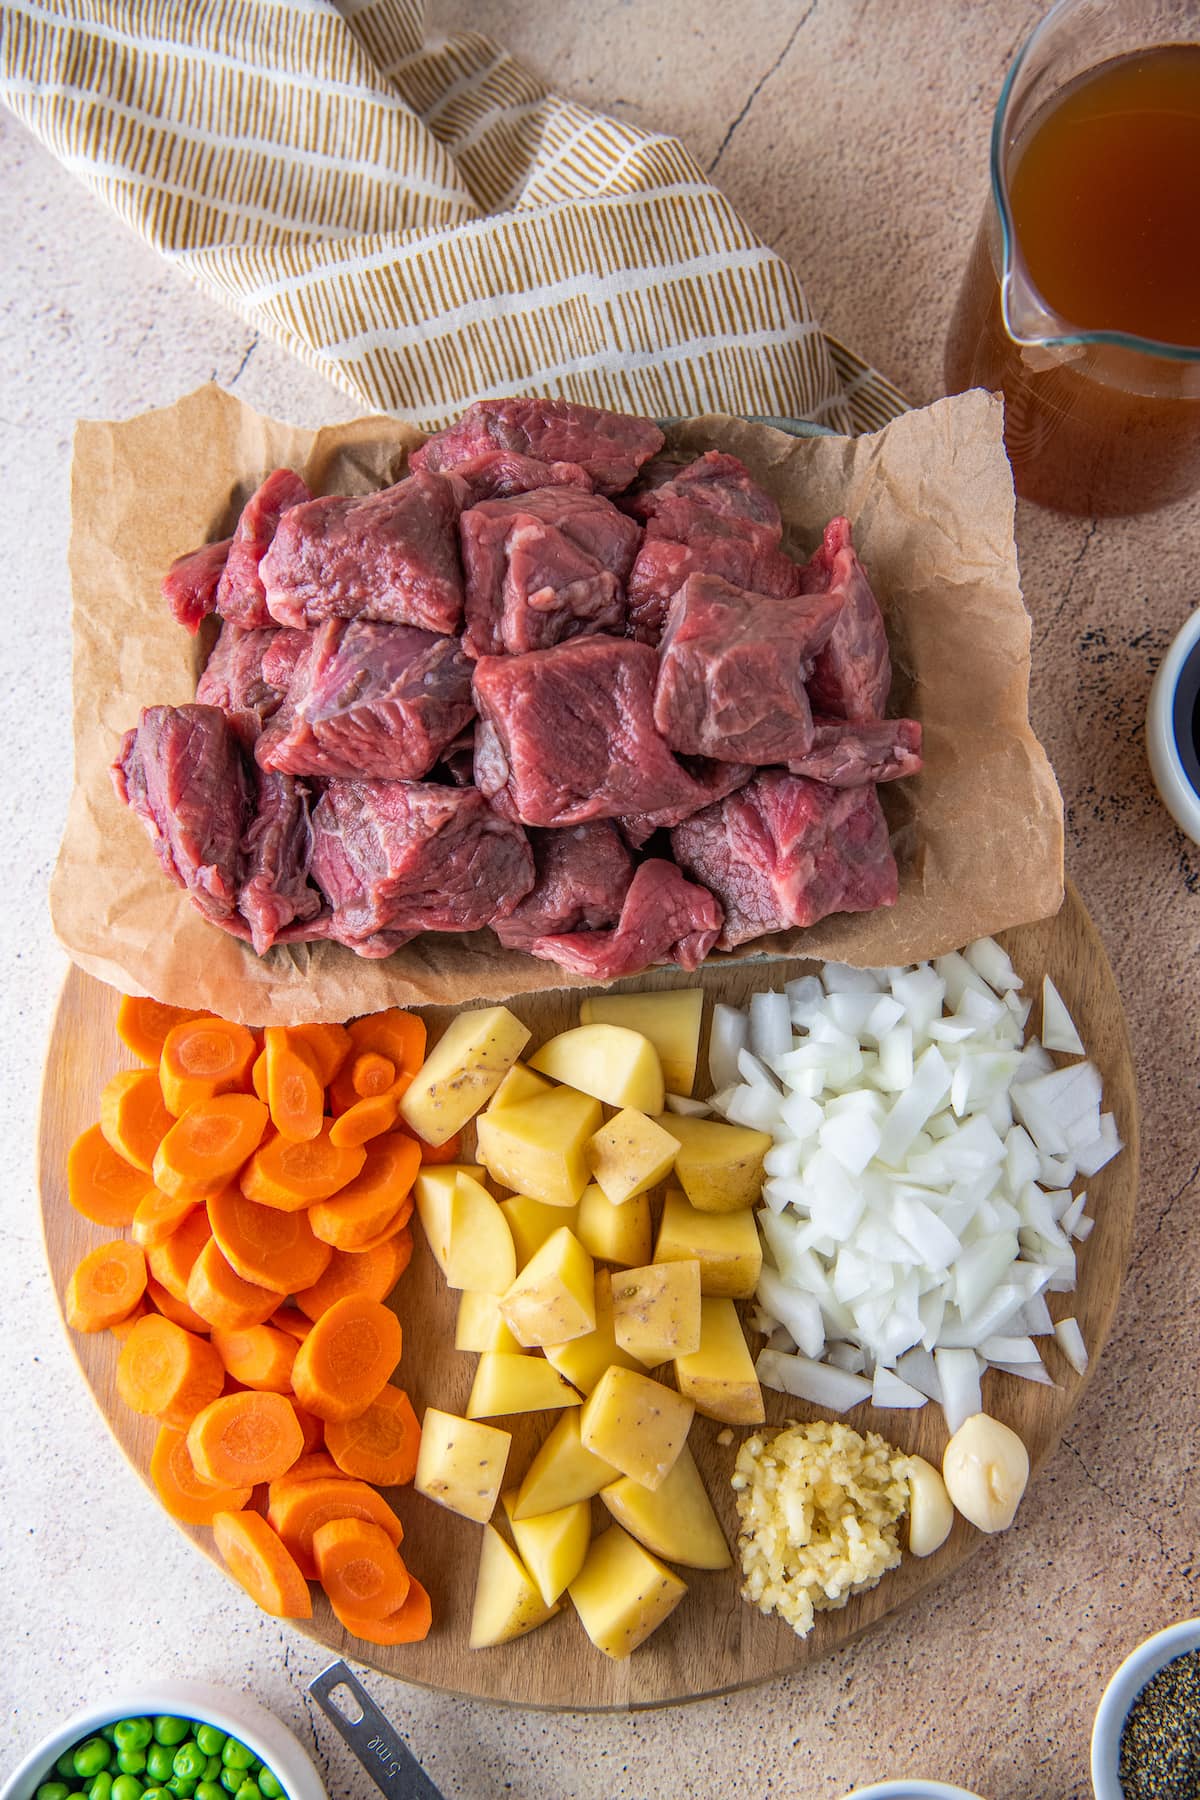 chunks of raw beer, cut up carrots, potatoes, and onions on a plate